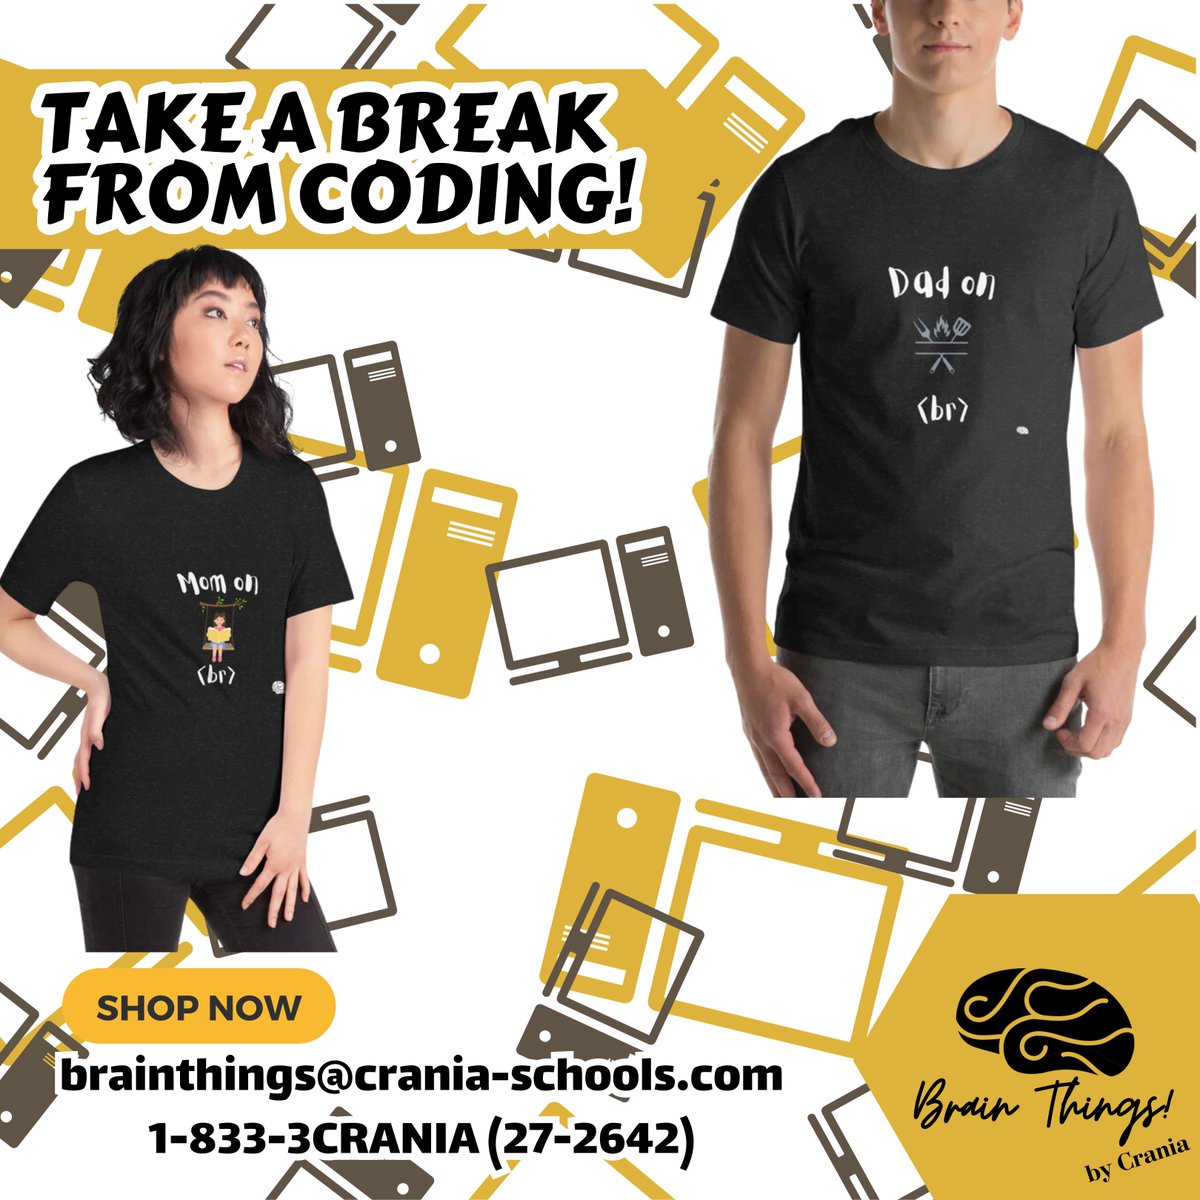 It's Day 8 of the 12 days of Christmas - 'On break from coding' shirts for Dad & Mom! Just in time to wear while explaining that their offspring is embarking a career in computer science ☺️
brainthings.crania-schools.com/?utm_source=tw…
#12DaysofGifts #codingnerd #nerdygifts #festivegifts #codinggifts